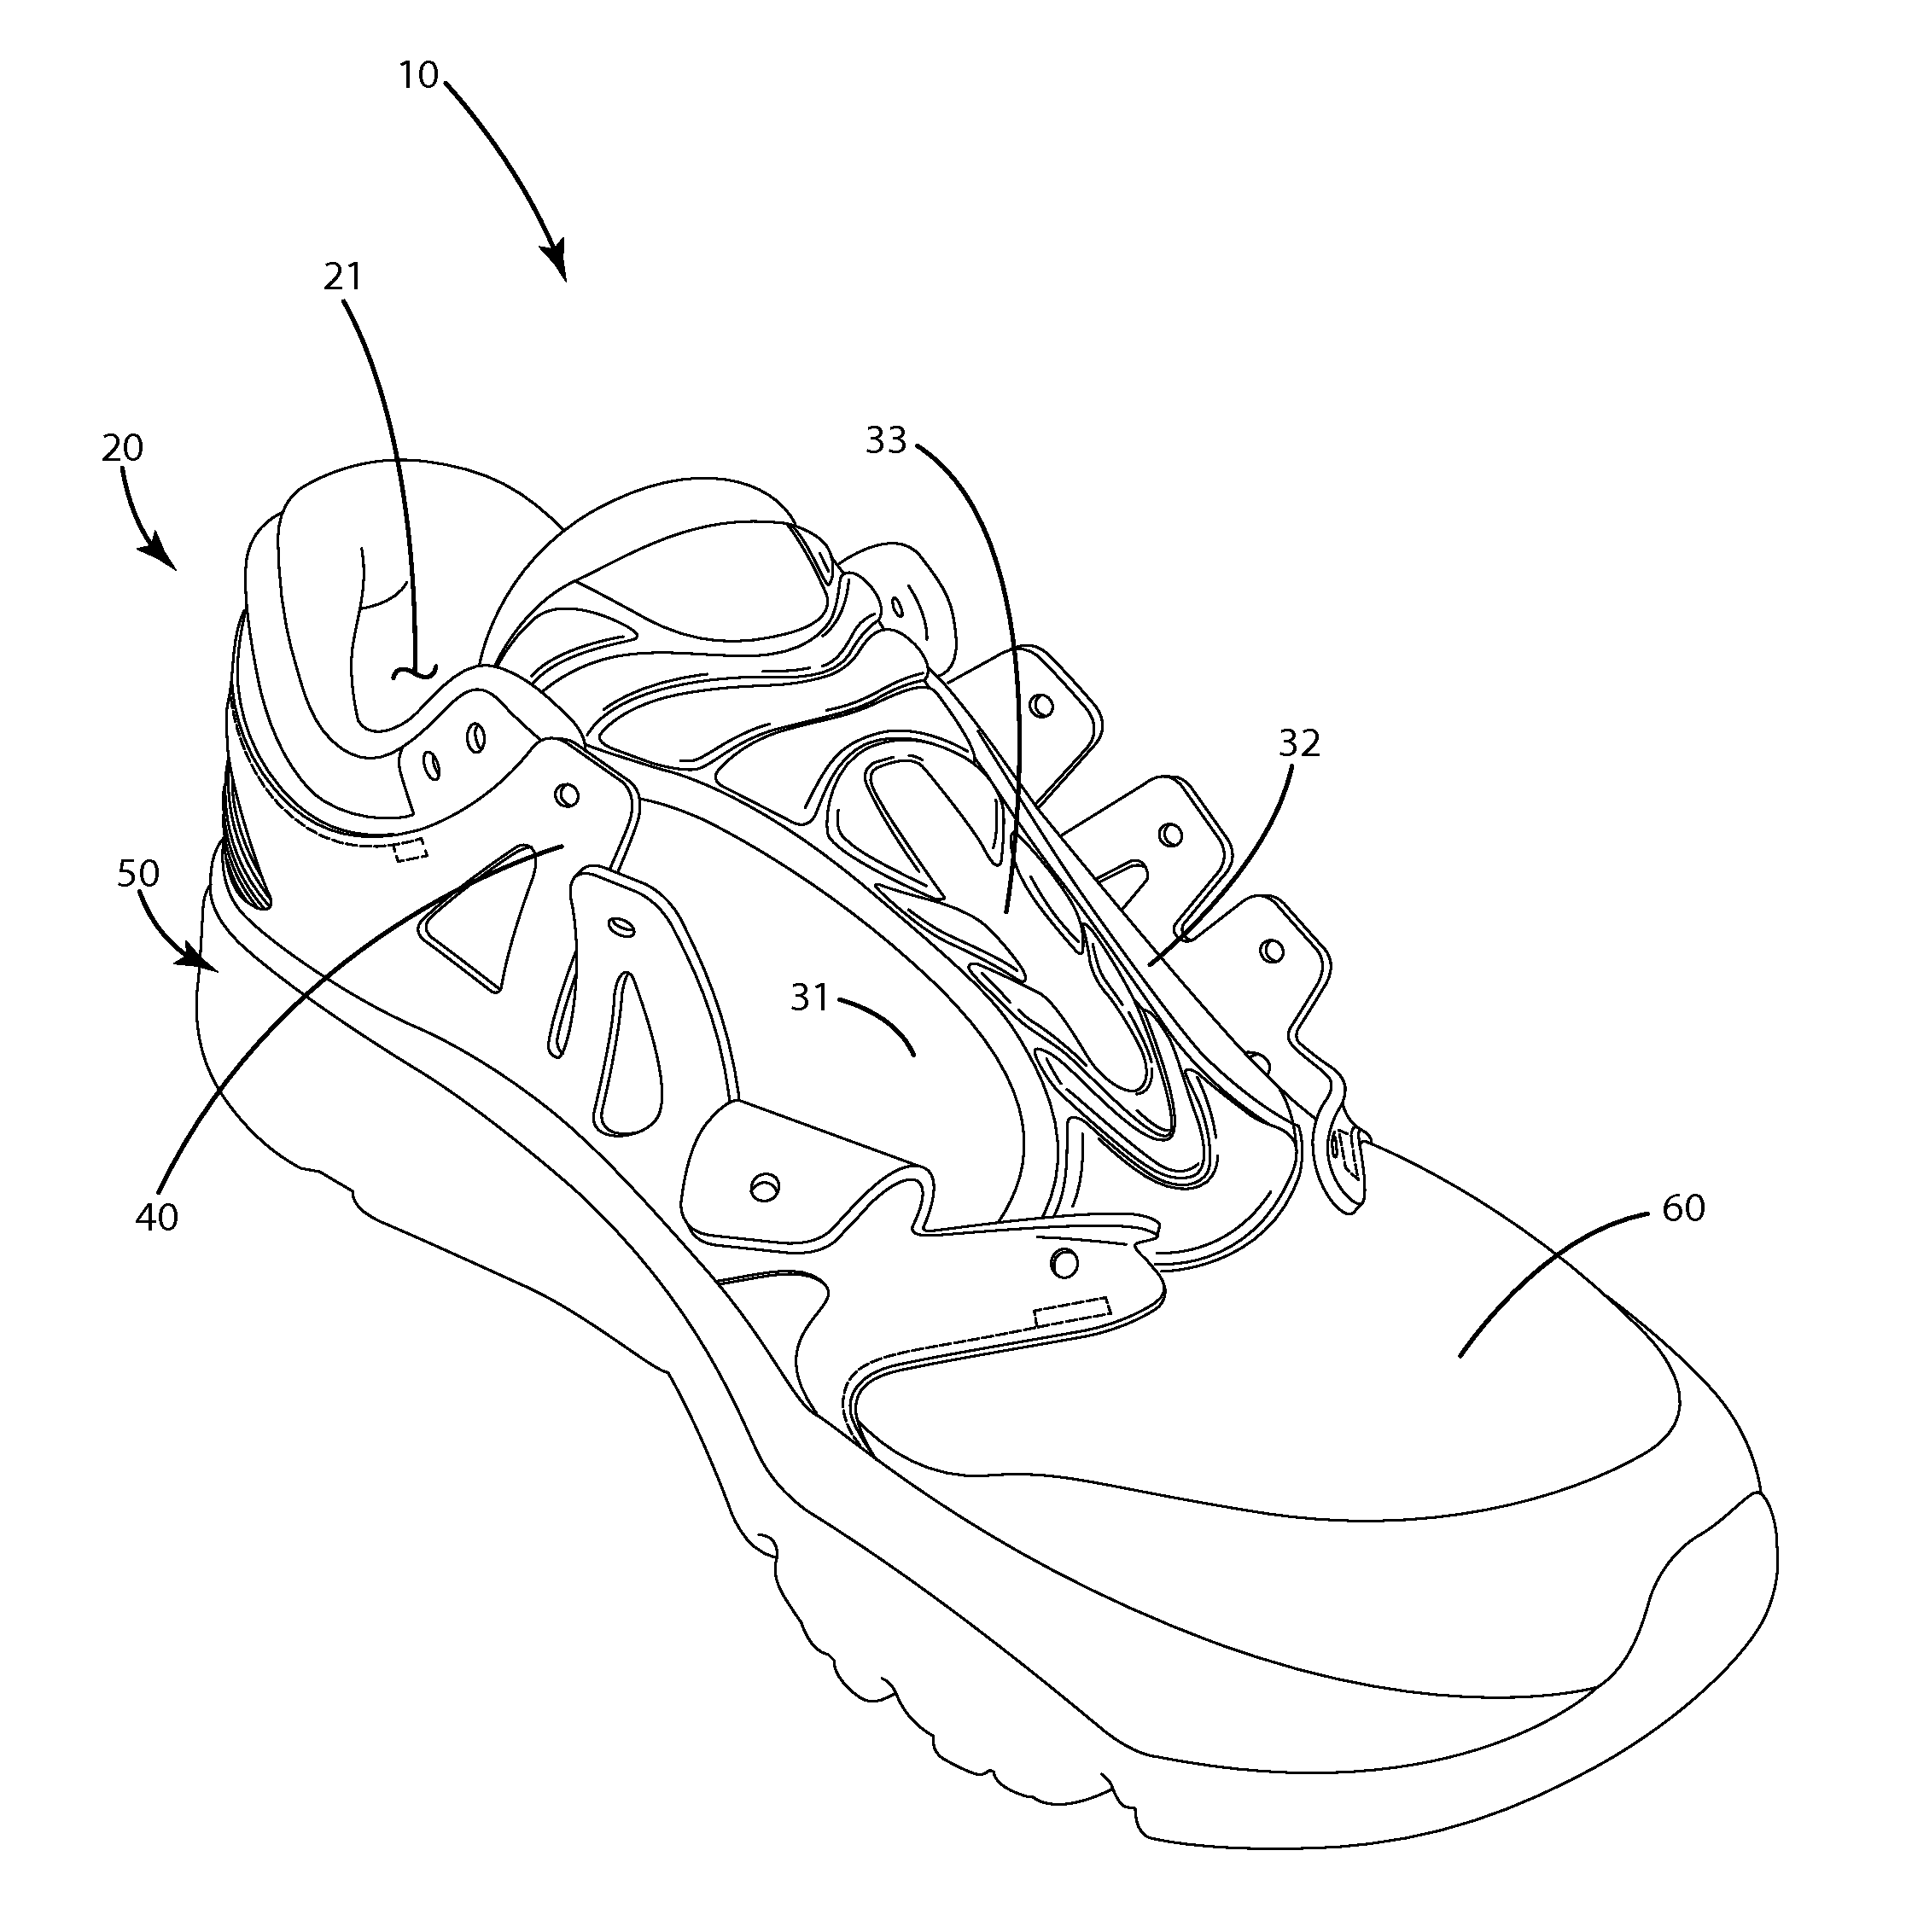 Footwear including a support cage